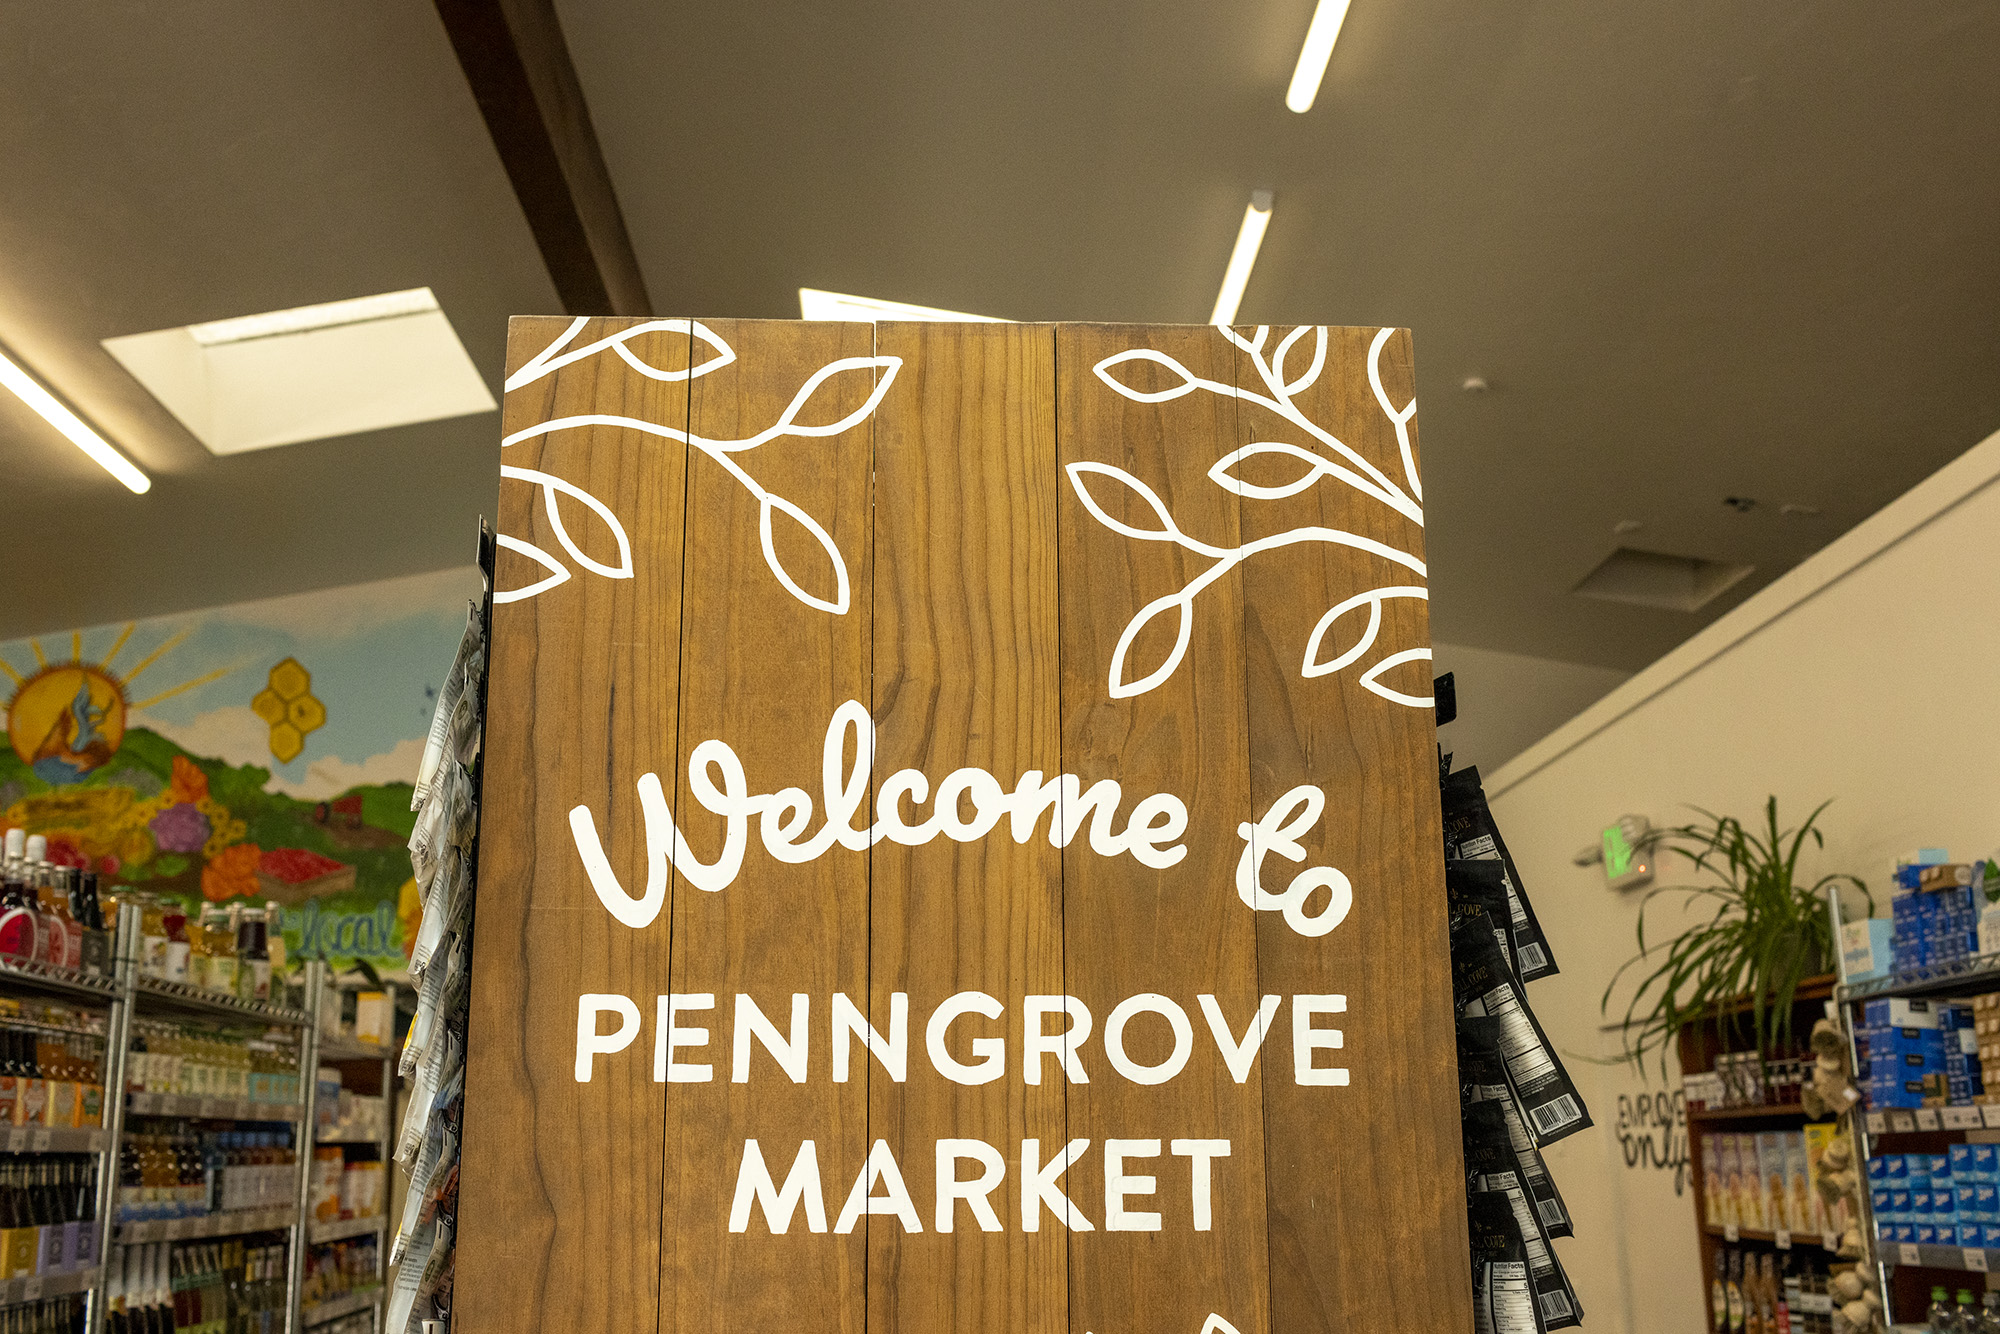 Welcome to Penngrove Market sign located at end of grocery aisle.